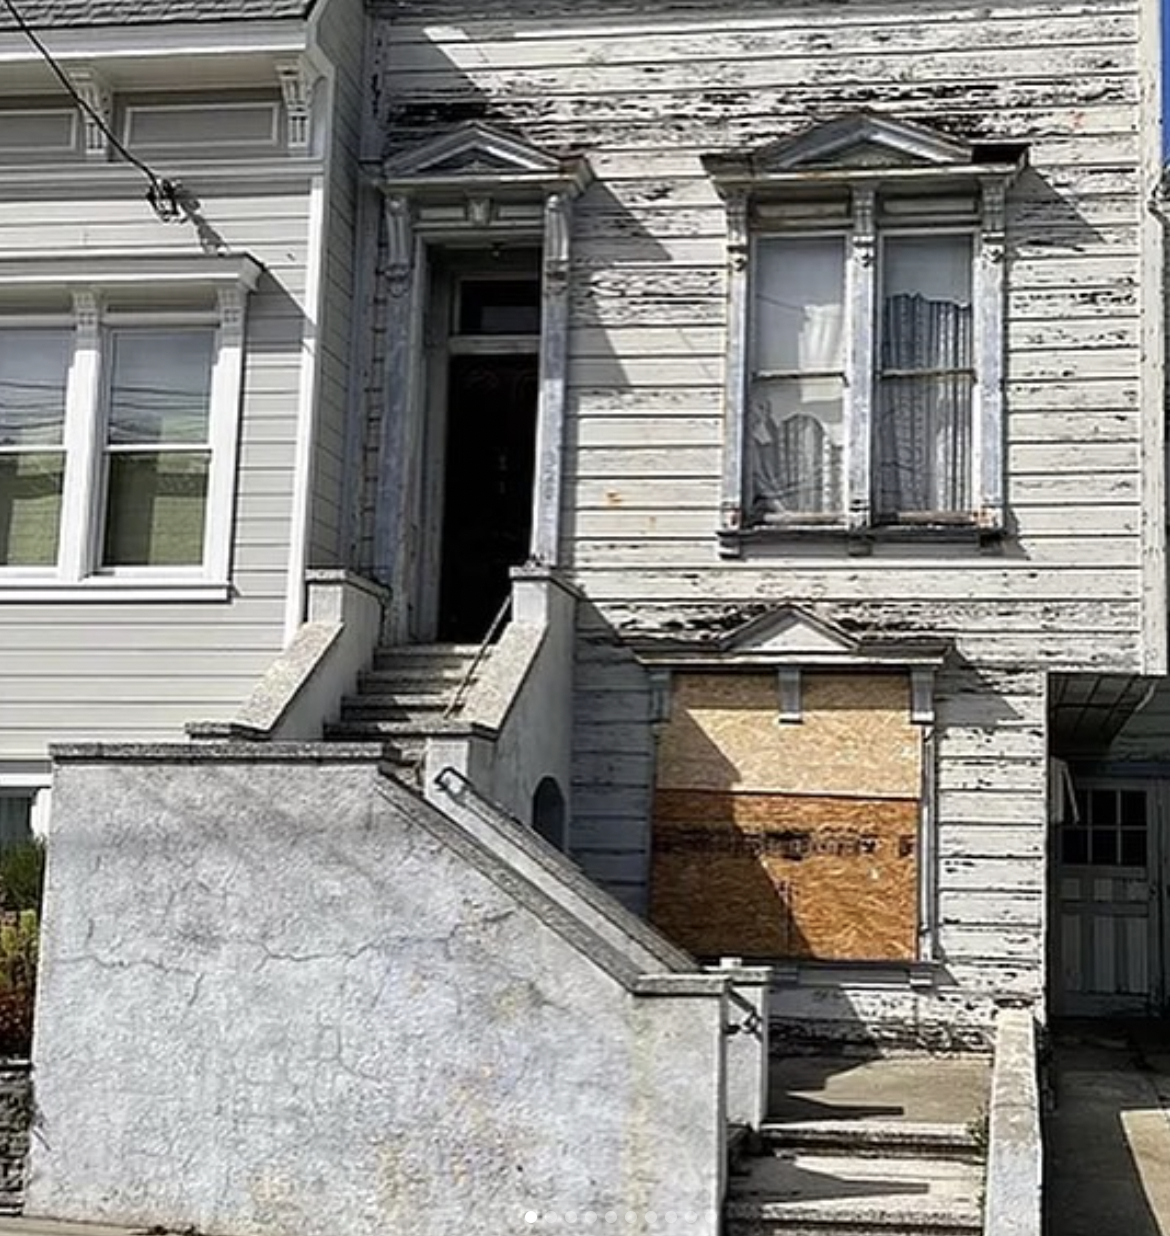 cursed zillow photo - worst house in the world